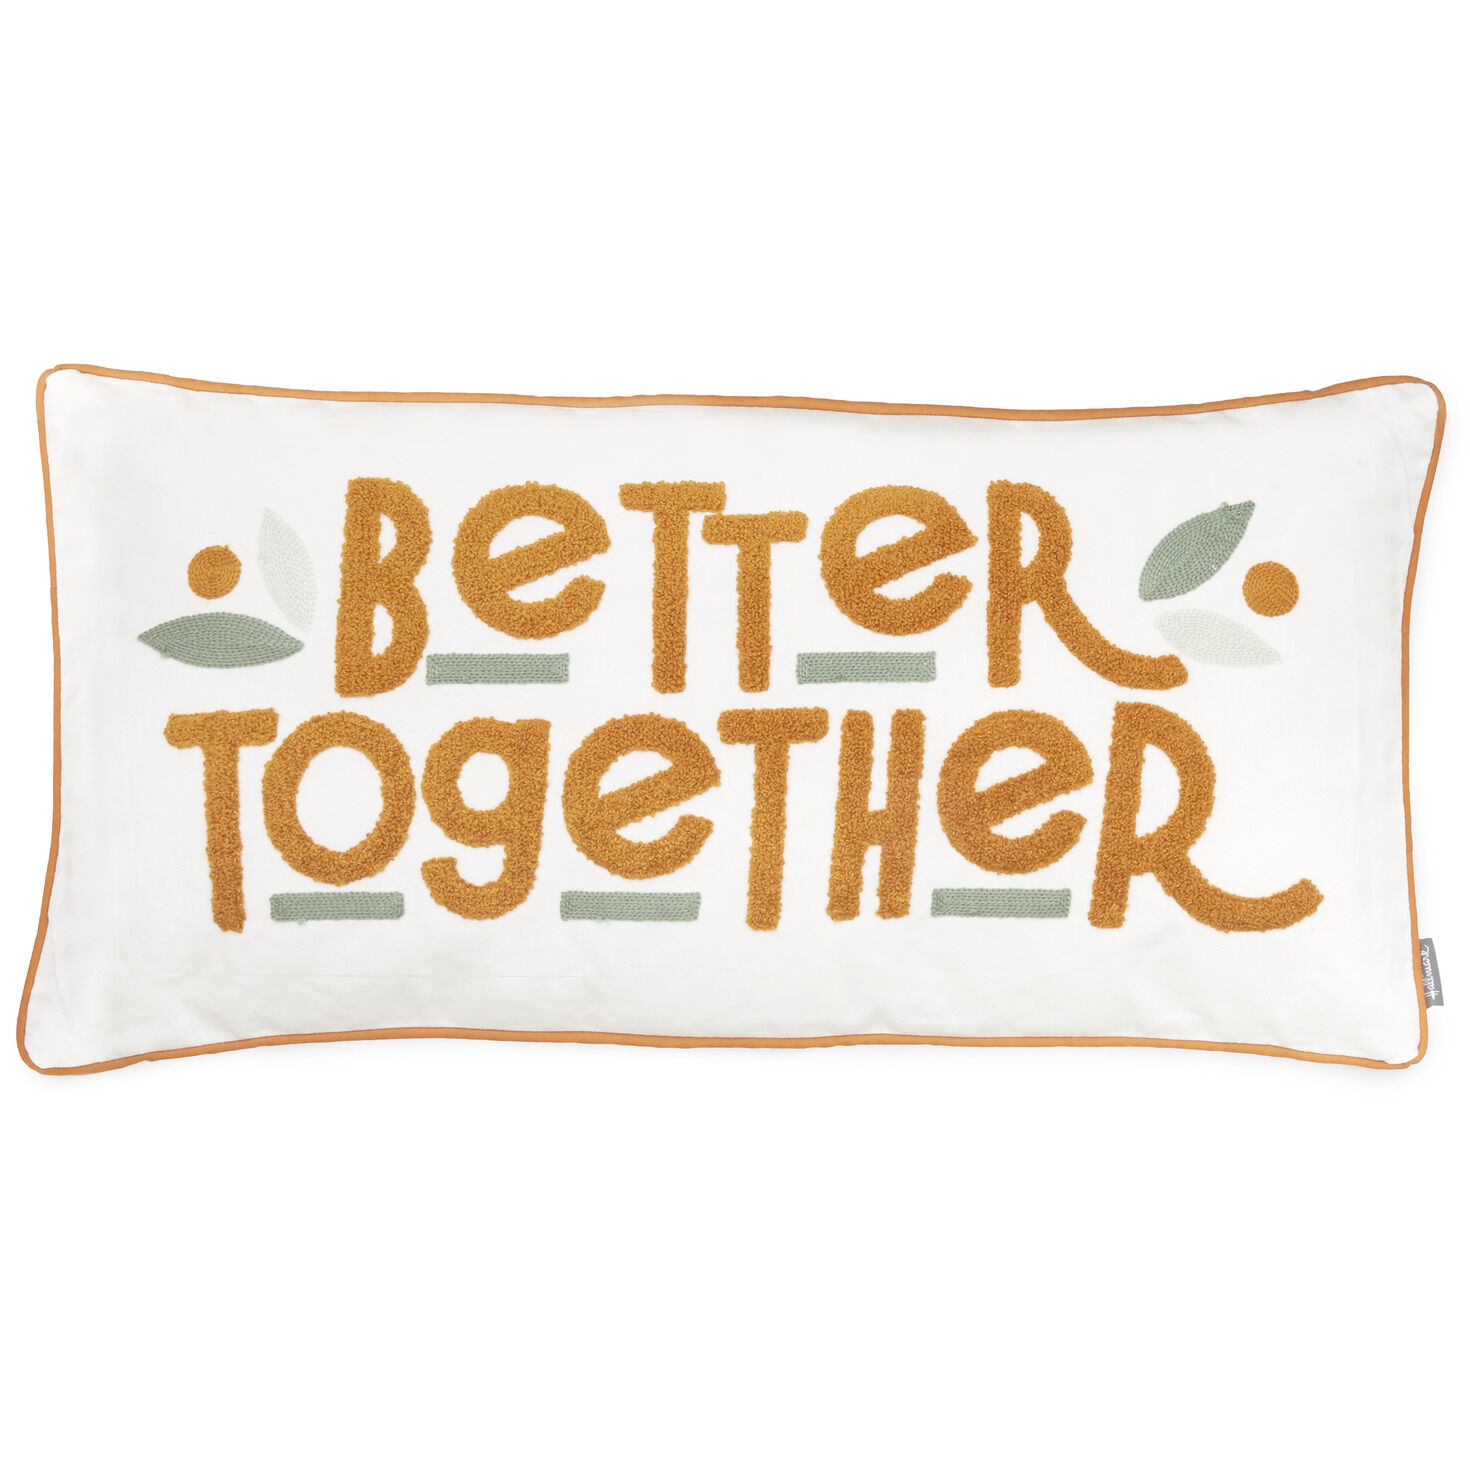 BETTER TOGETHER PILLOW CUSHION VALENTINES DAY WEDDING PERSONALISED PRESENT GIFT 